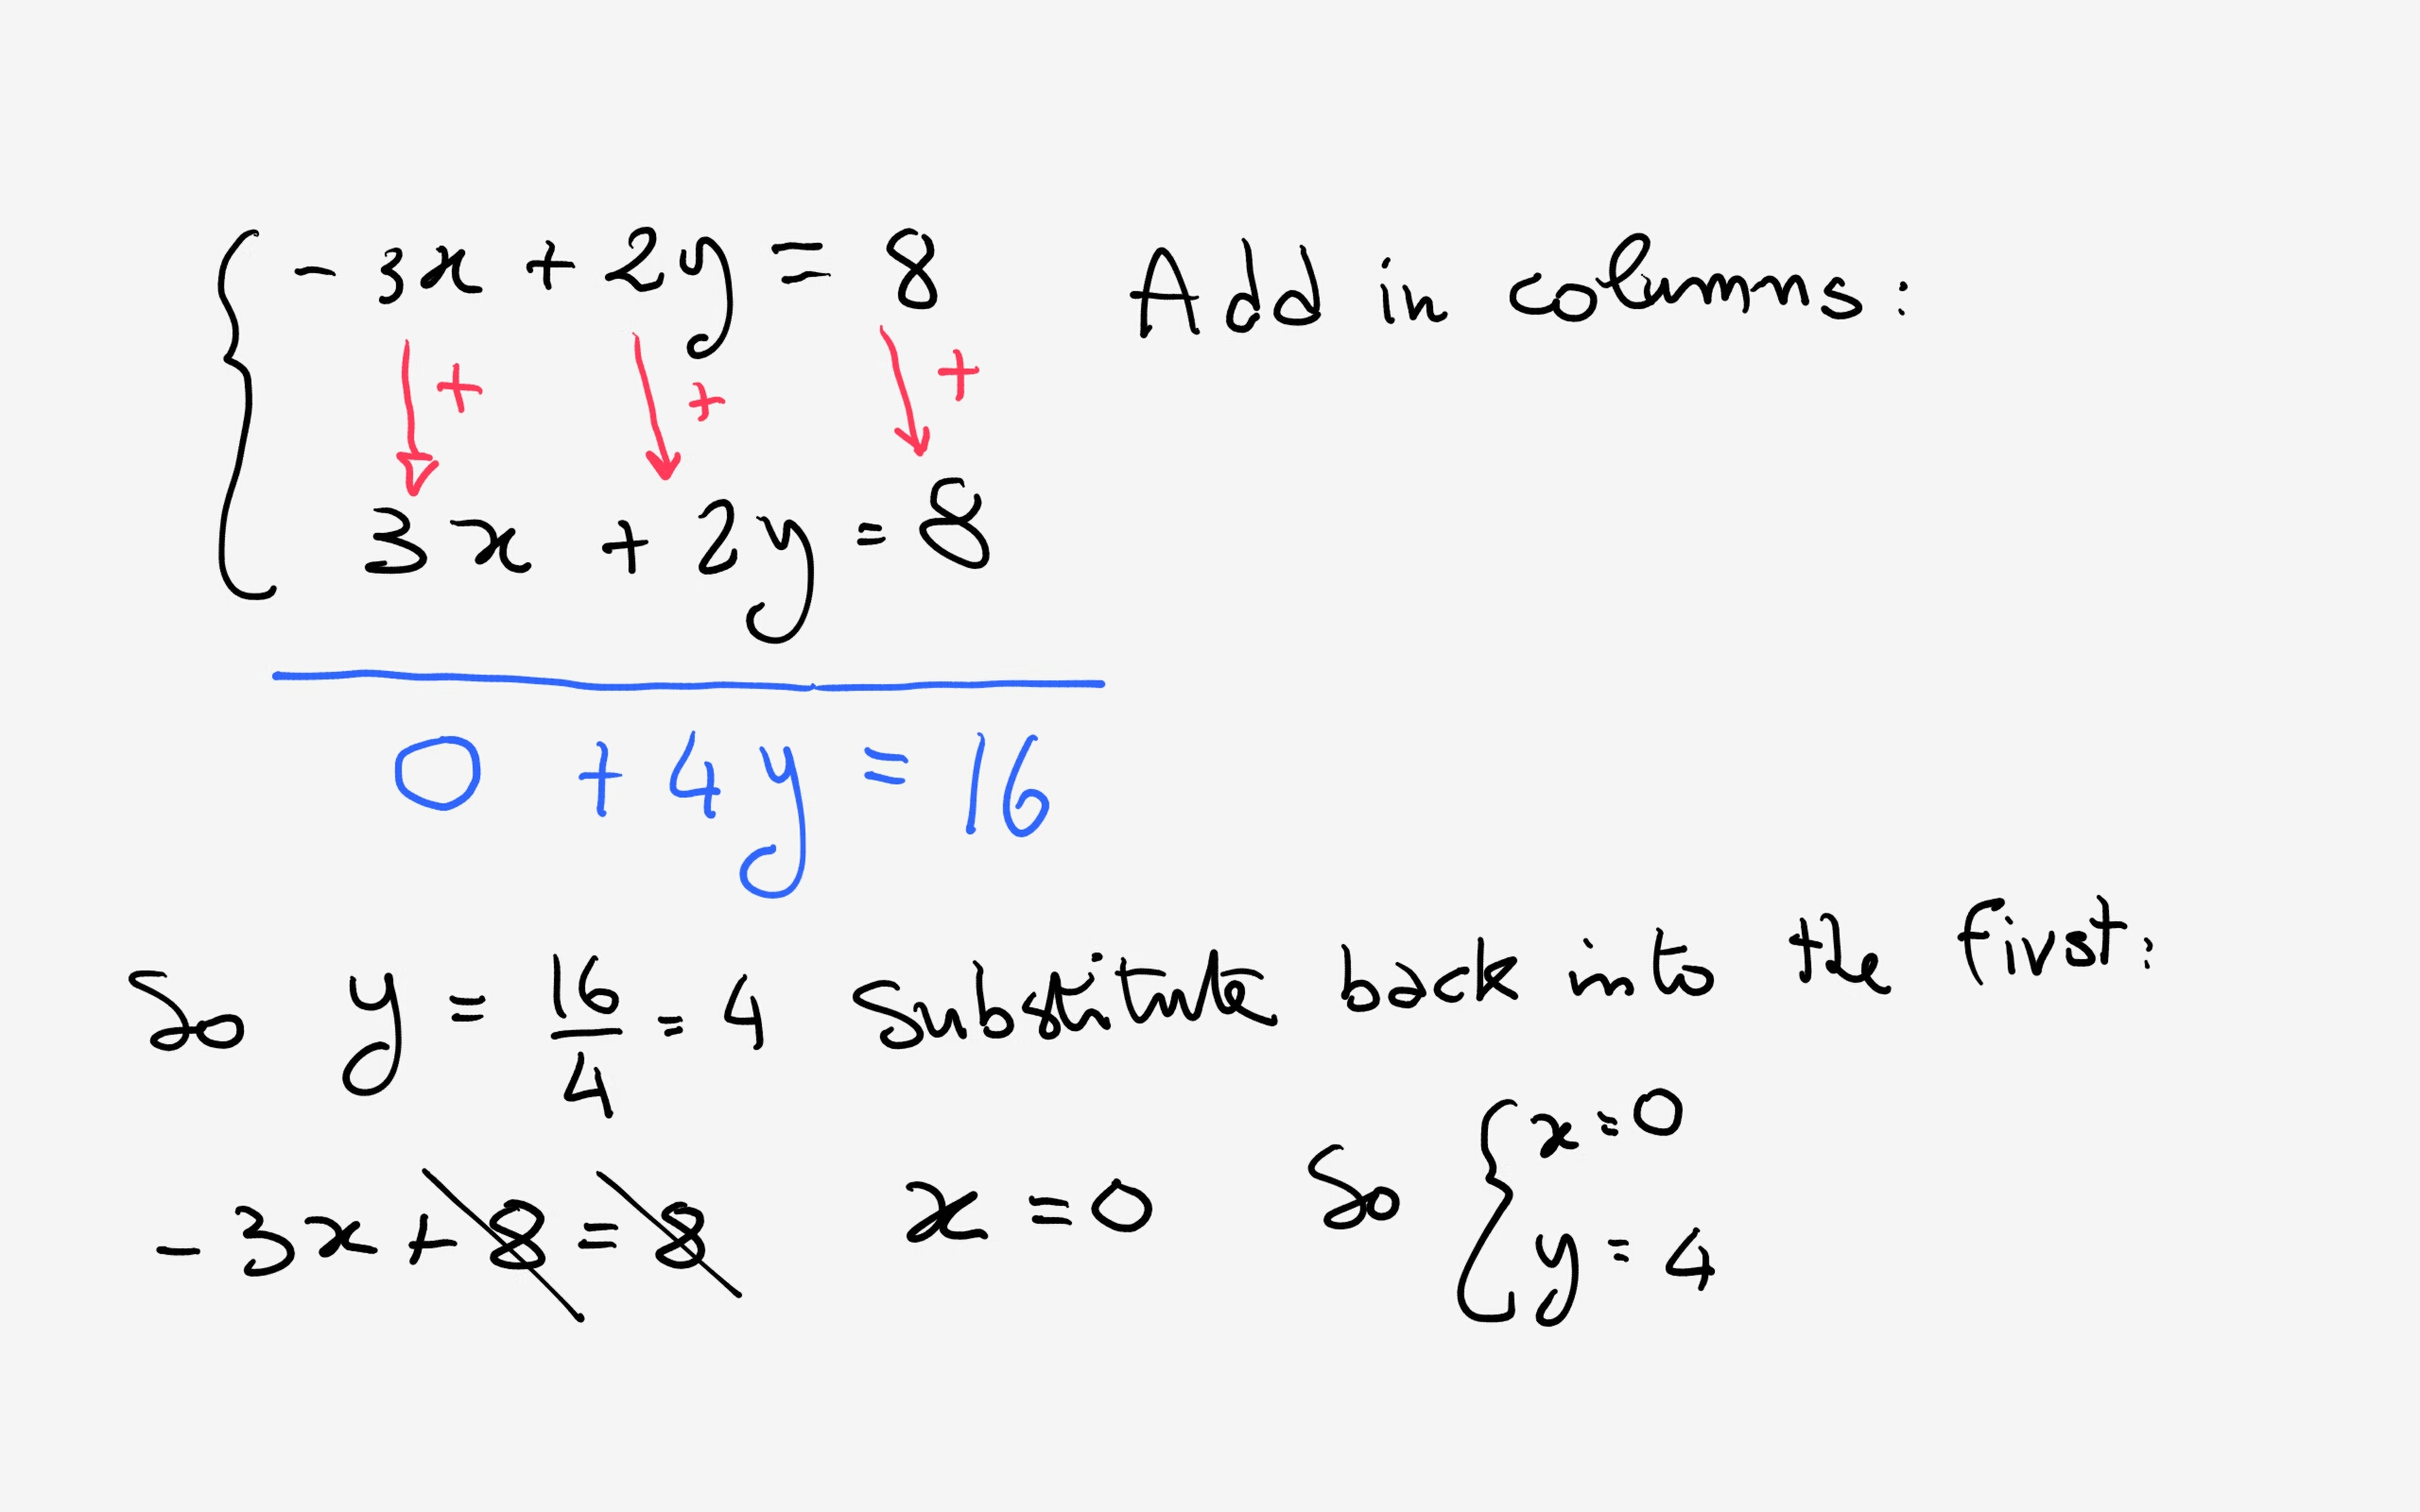 How Do You Solve Using The Addition Method And Determine If The System Is Independant Dependant